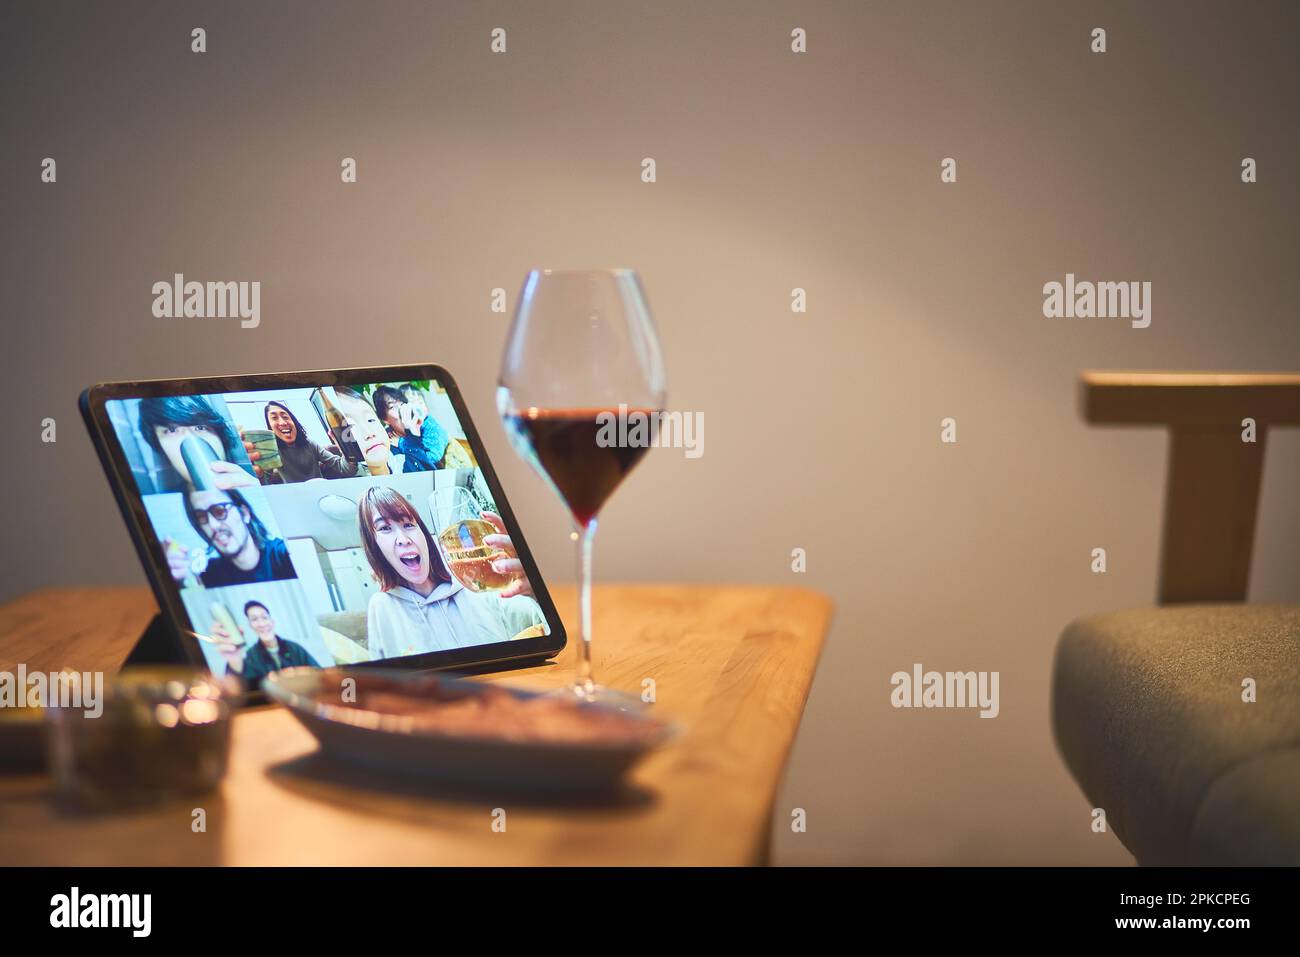 Remote drinking computer screen, red wine and snacks Stock Photo